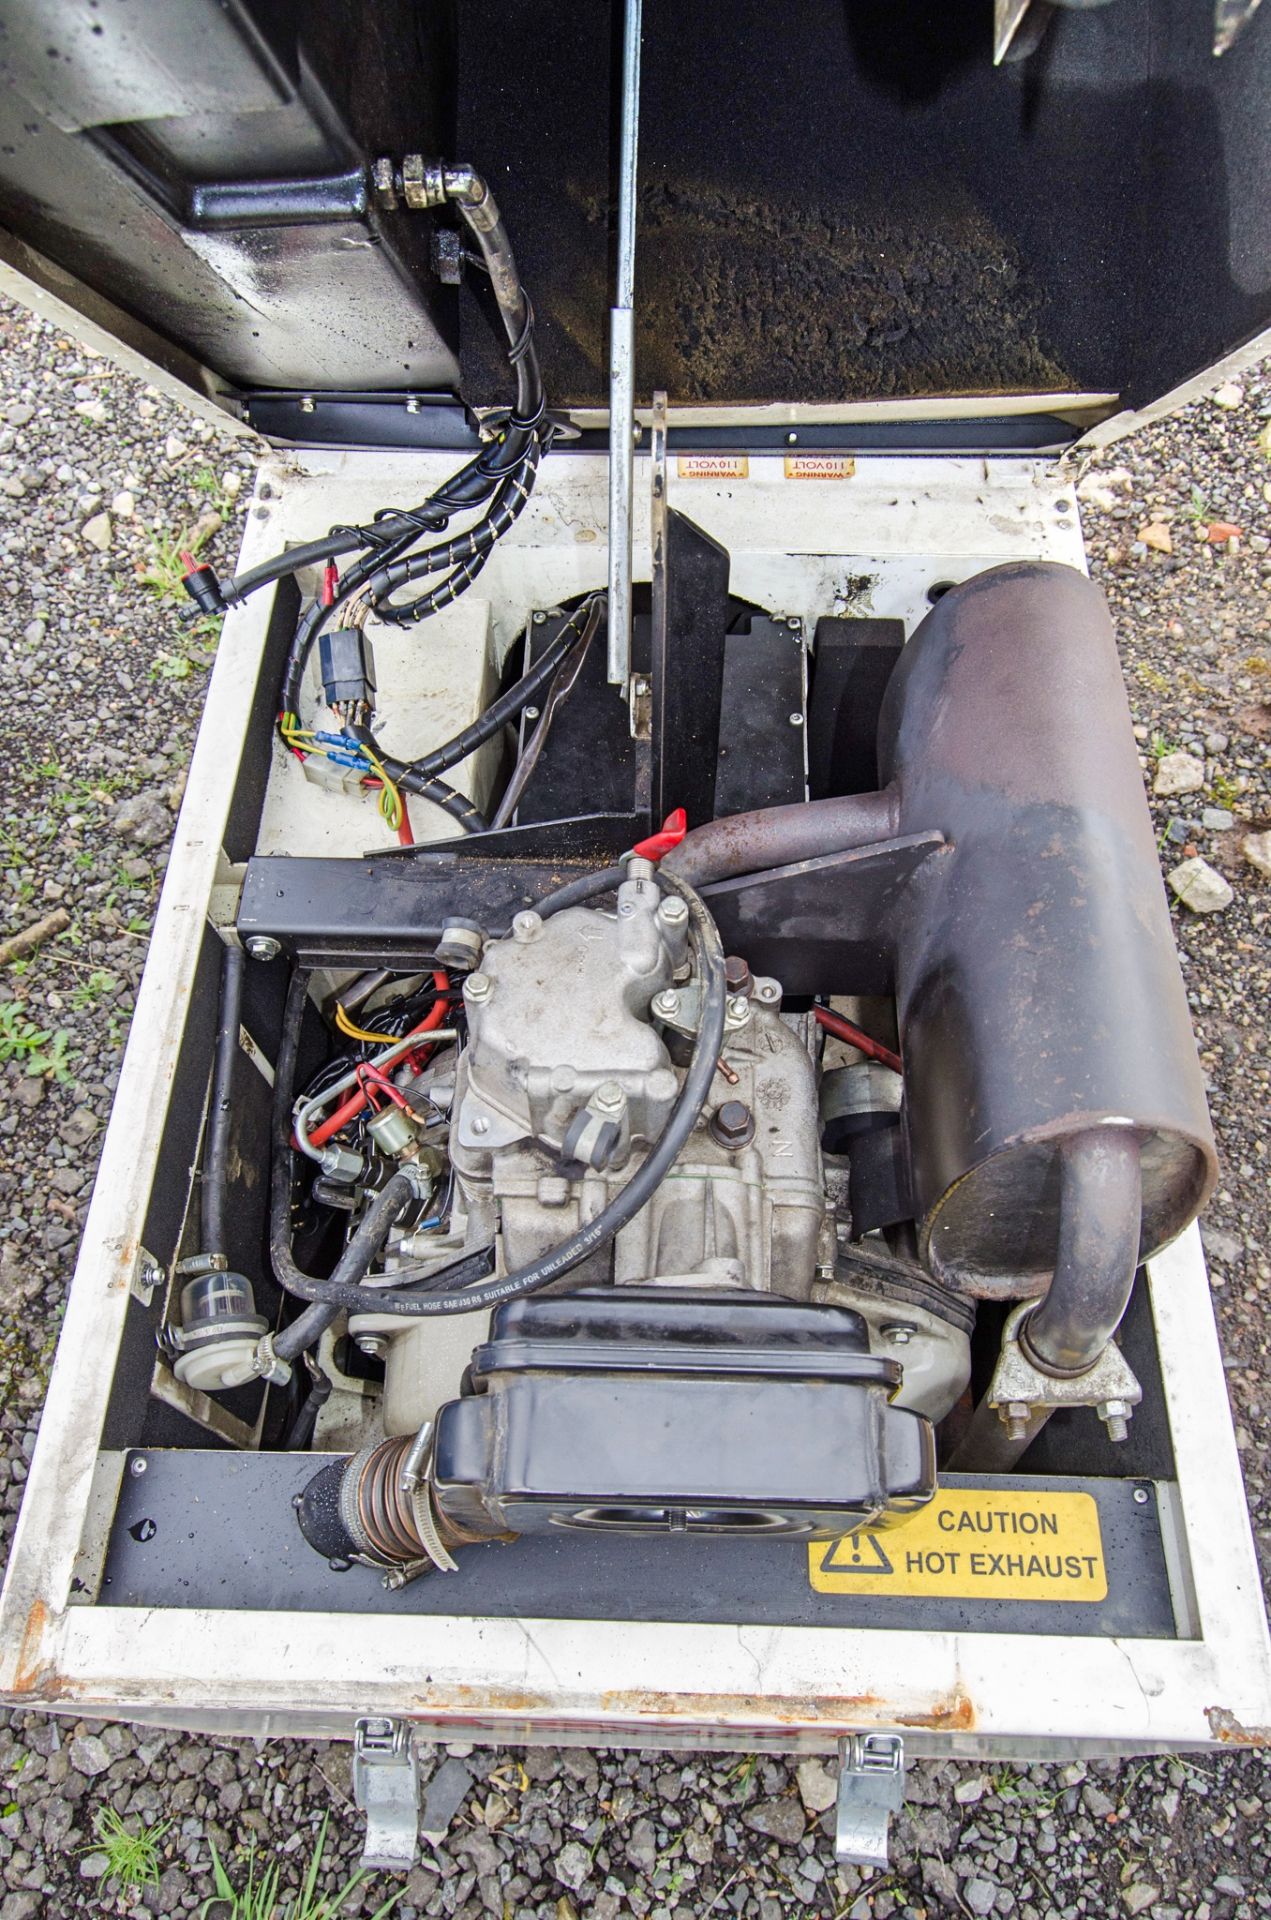 Stephill SE6000 6 kva diesel driven generator S/N: 278554 Recorded Hours: 1355 CW44212 ** Electrical - Image 4 of 4